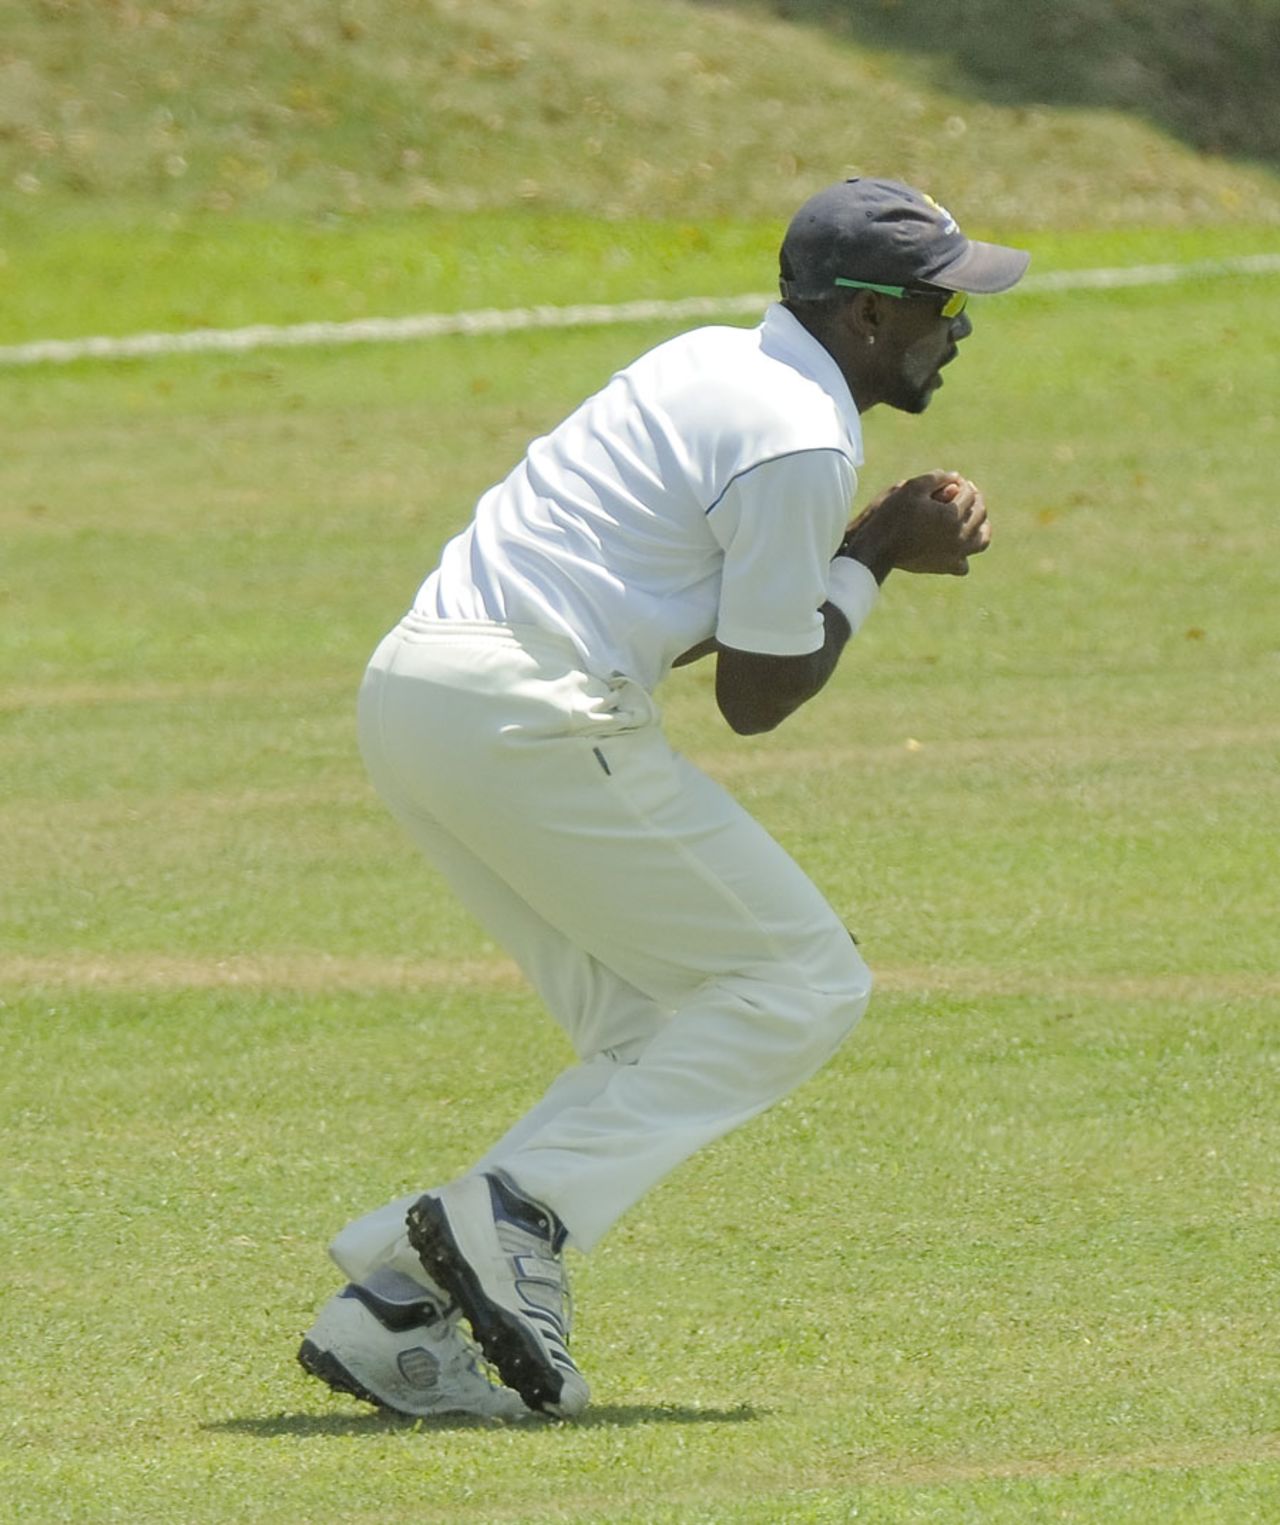 Raymon Reifer takes a catch, Combined Campuses and Colleges v Leeward Islands, Regional Four Day Competition, Day 4, Bridgetown, March 9, 2013